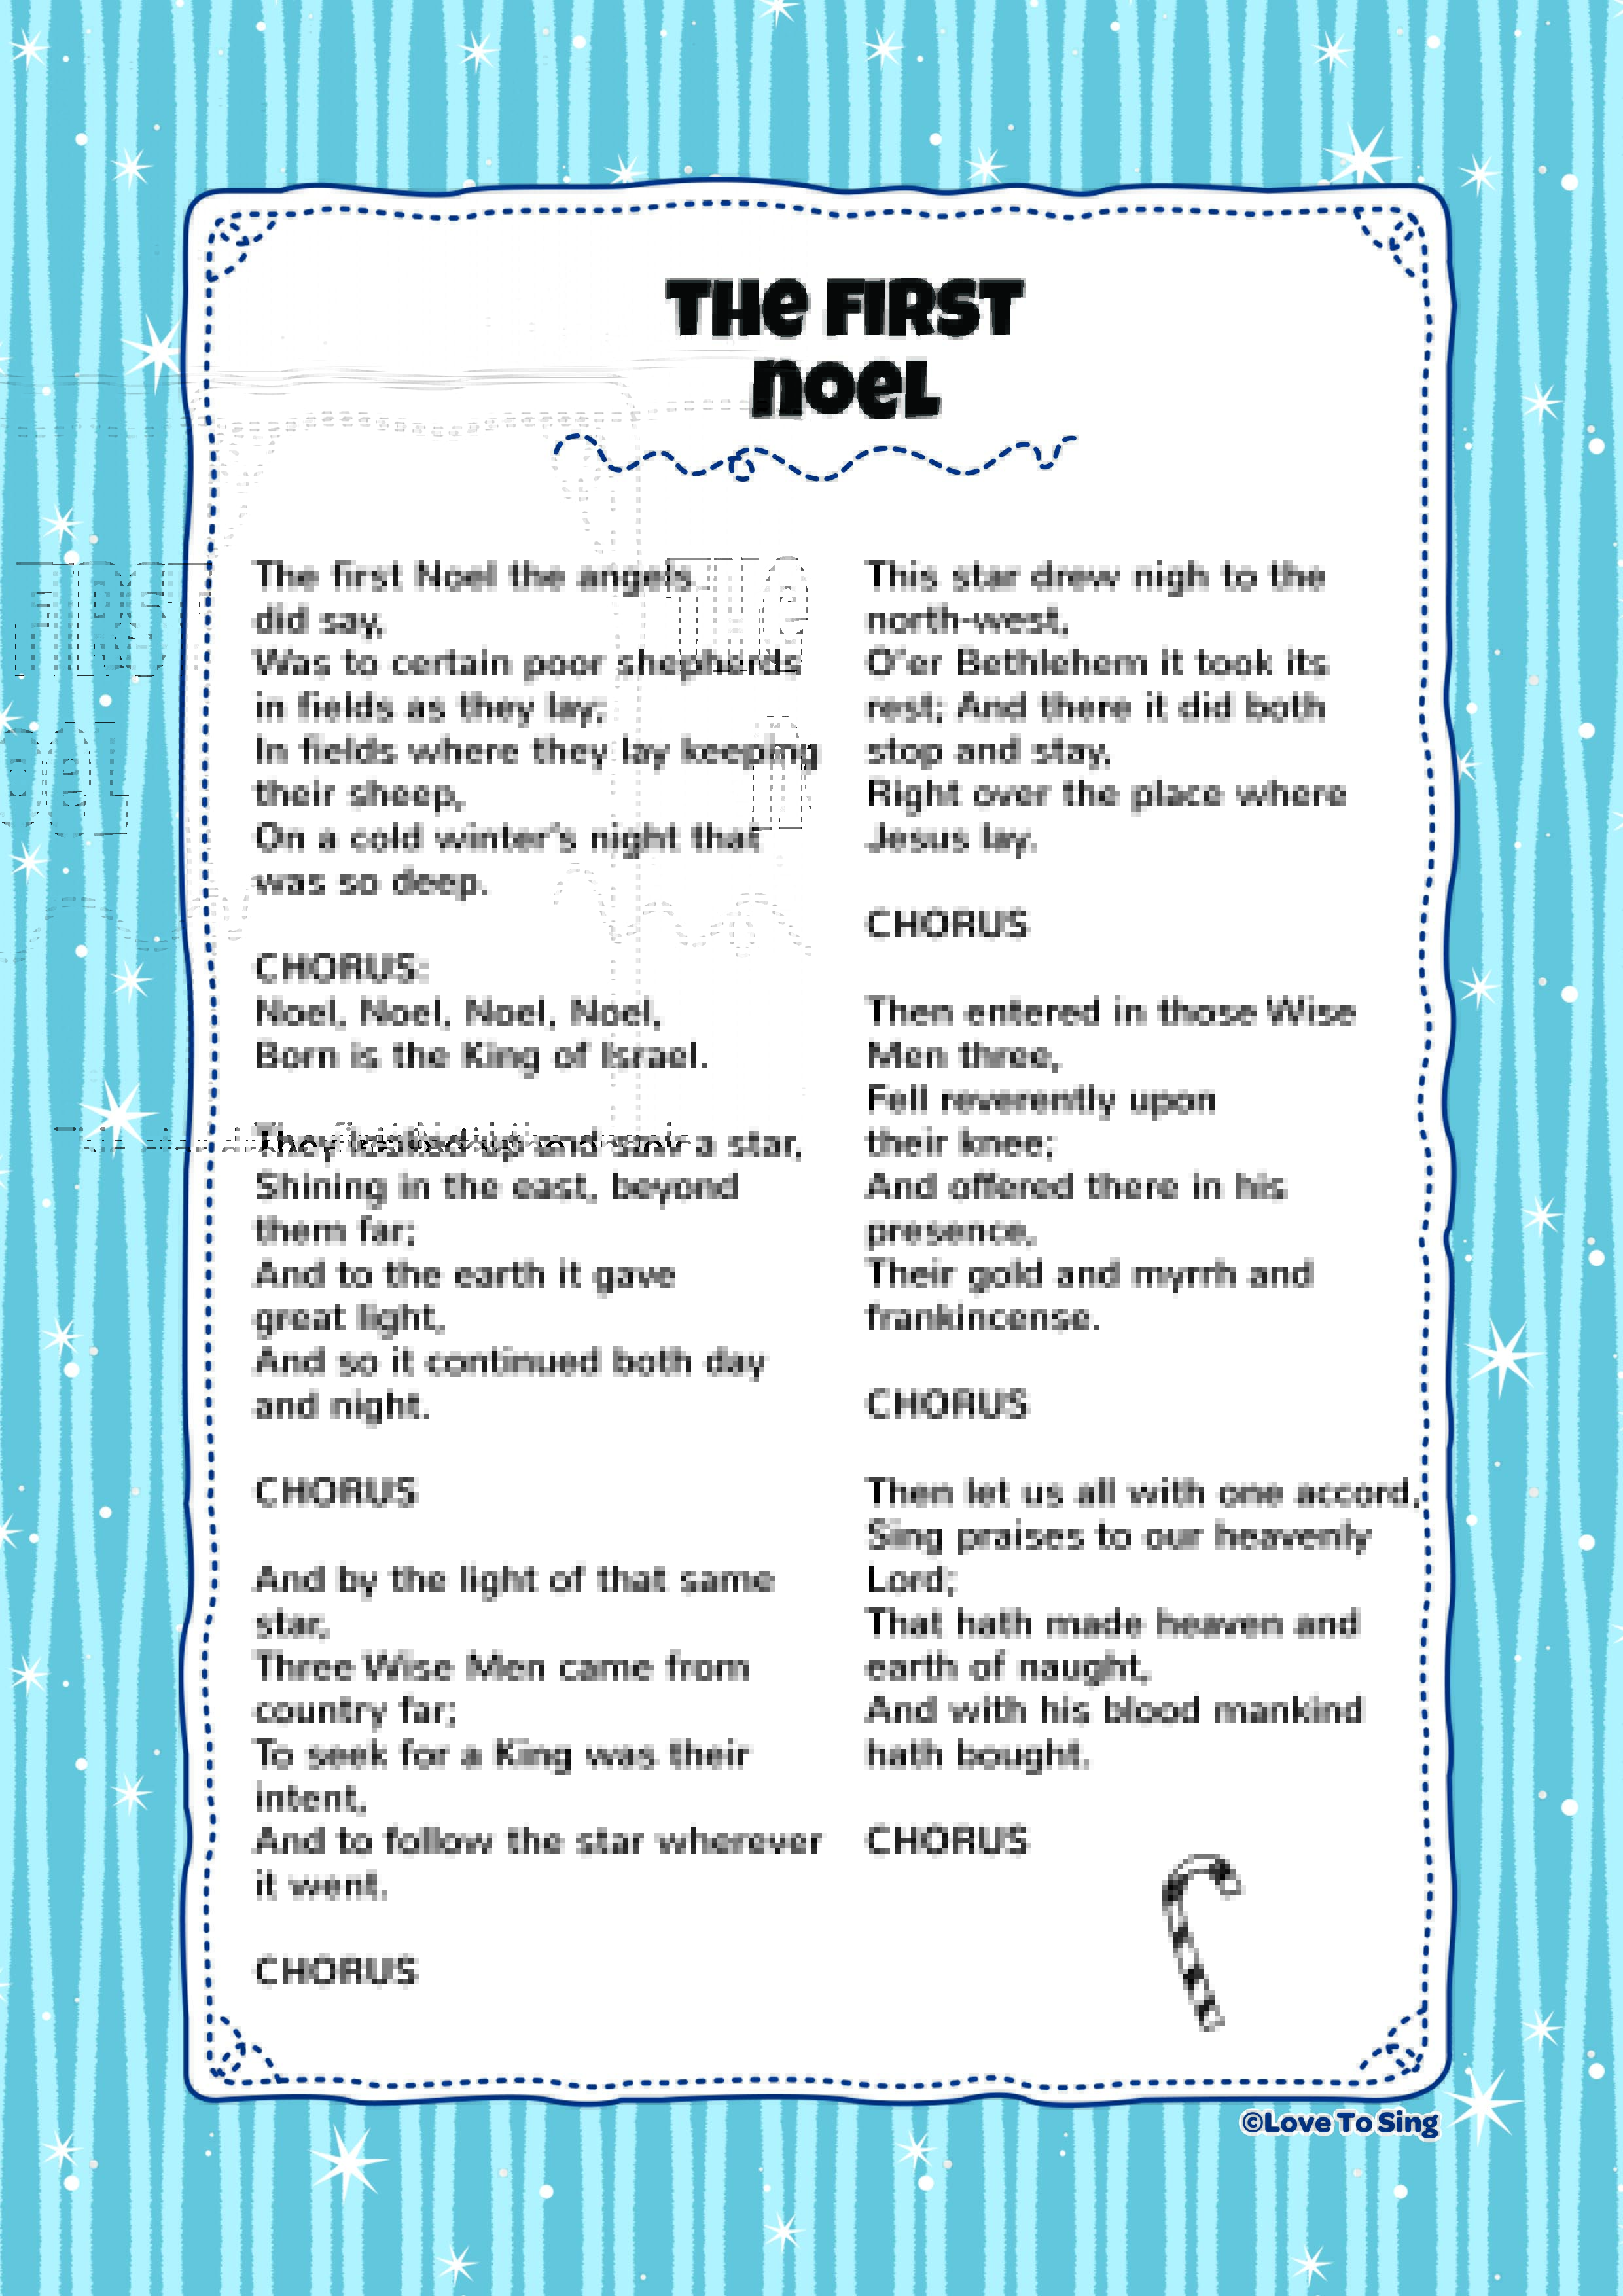 The First Noel | Kids Video Song with FREE Lyrics & Activities!